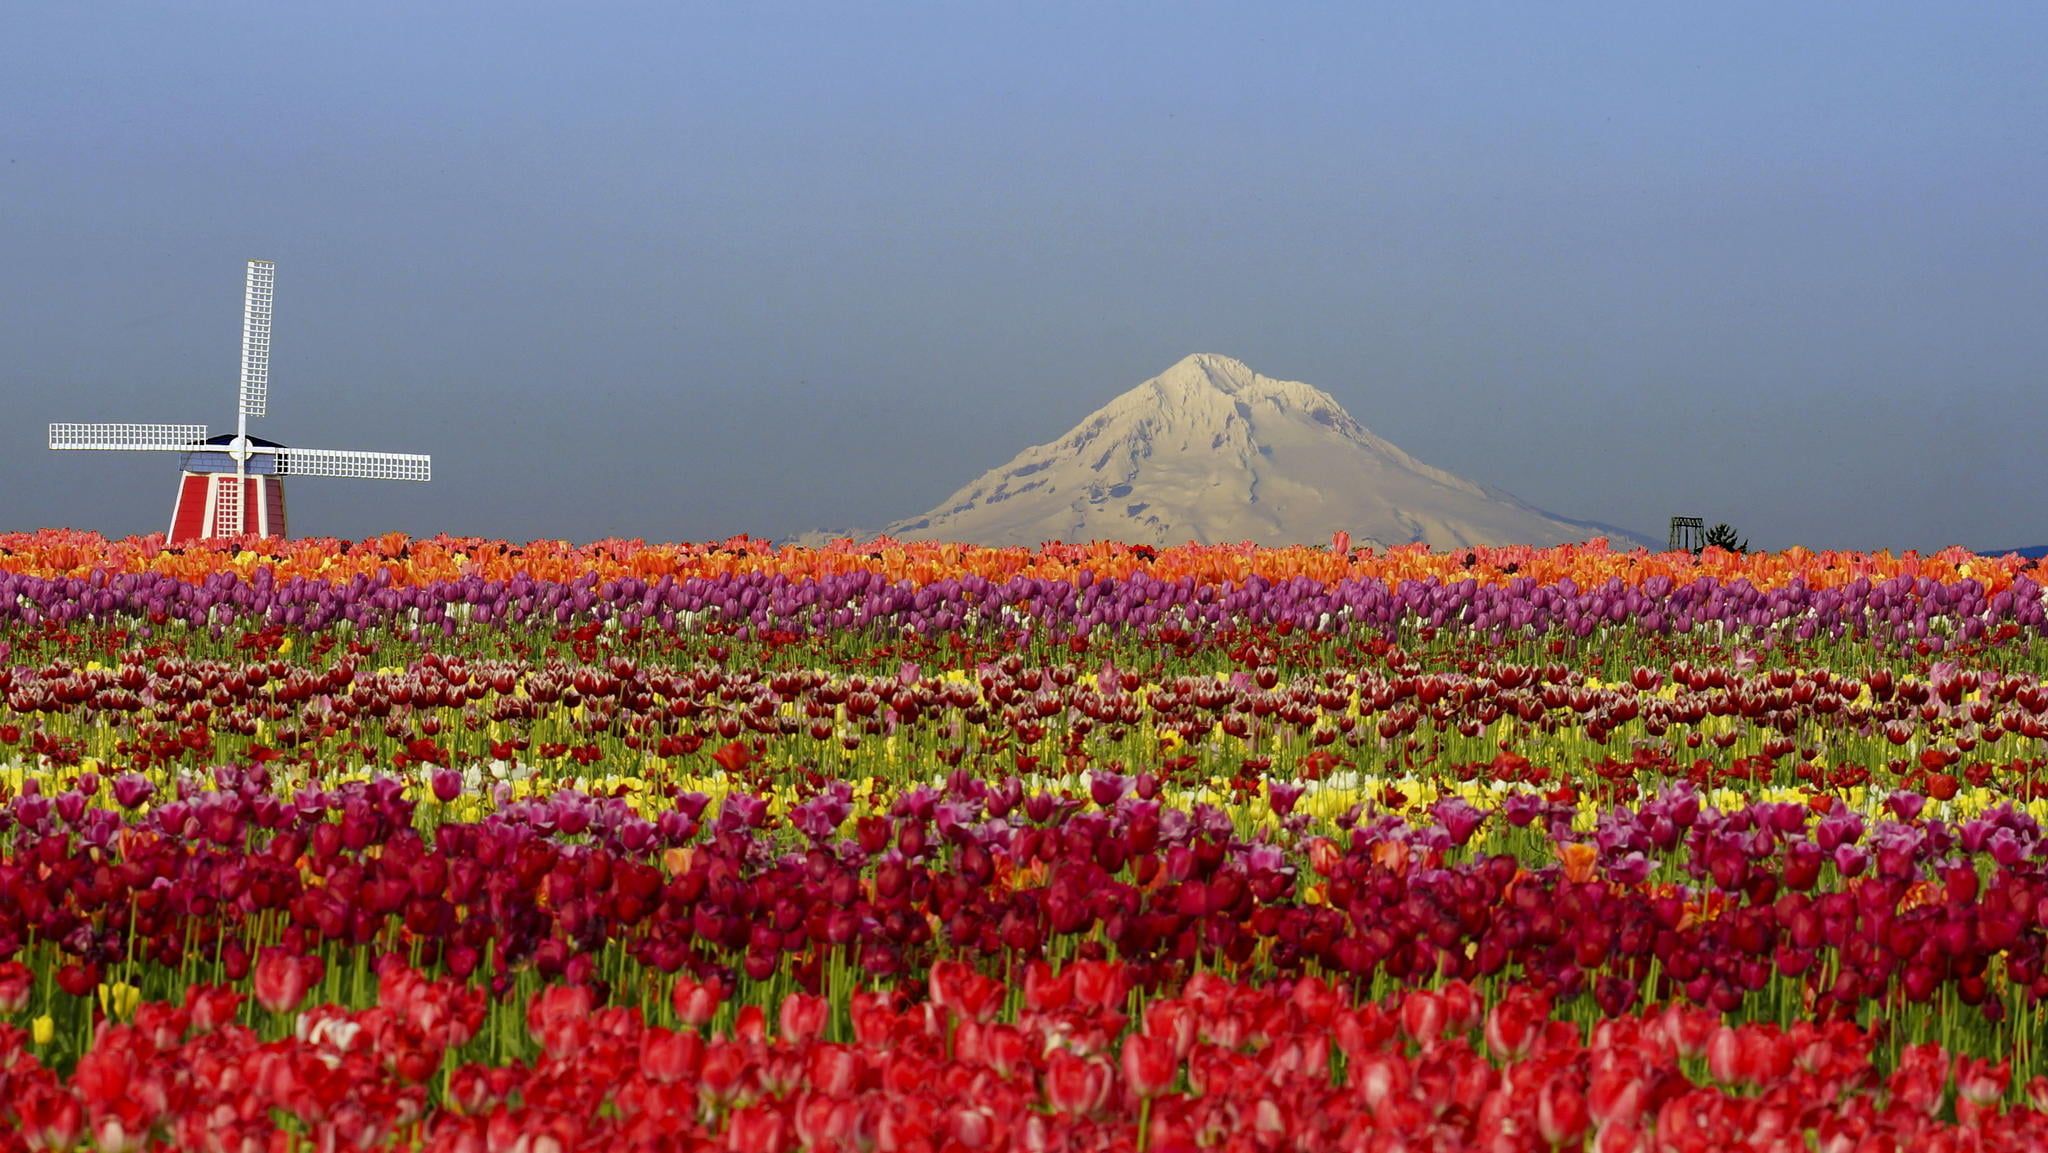 Bed of red and purple tulips, field, flowers, mountains, nature